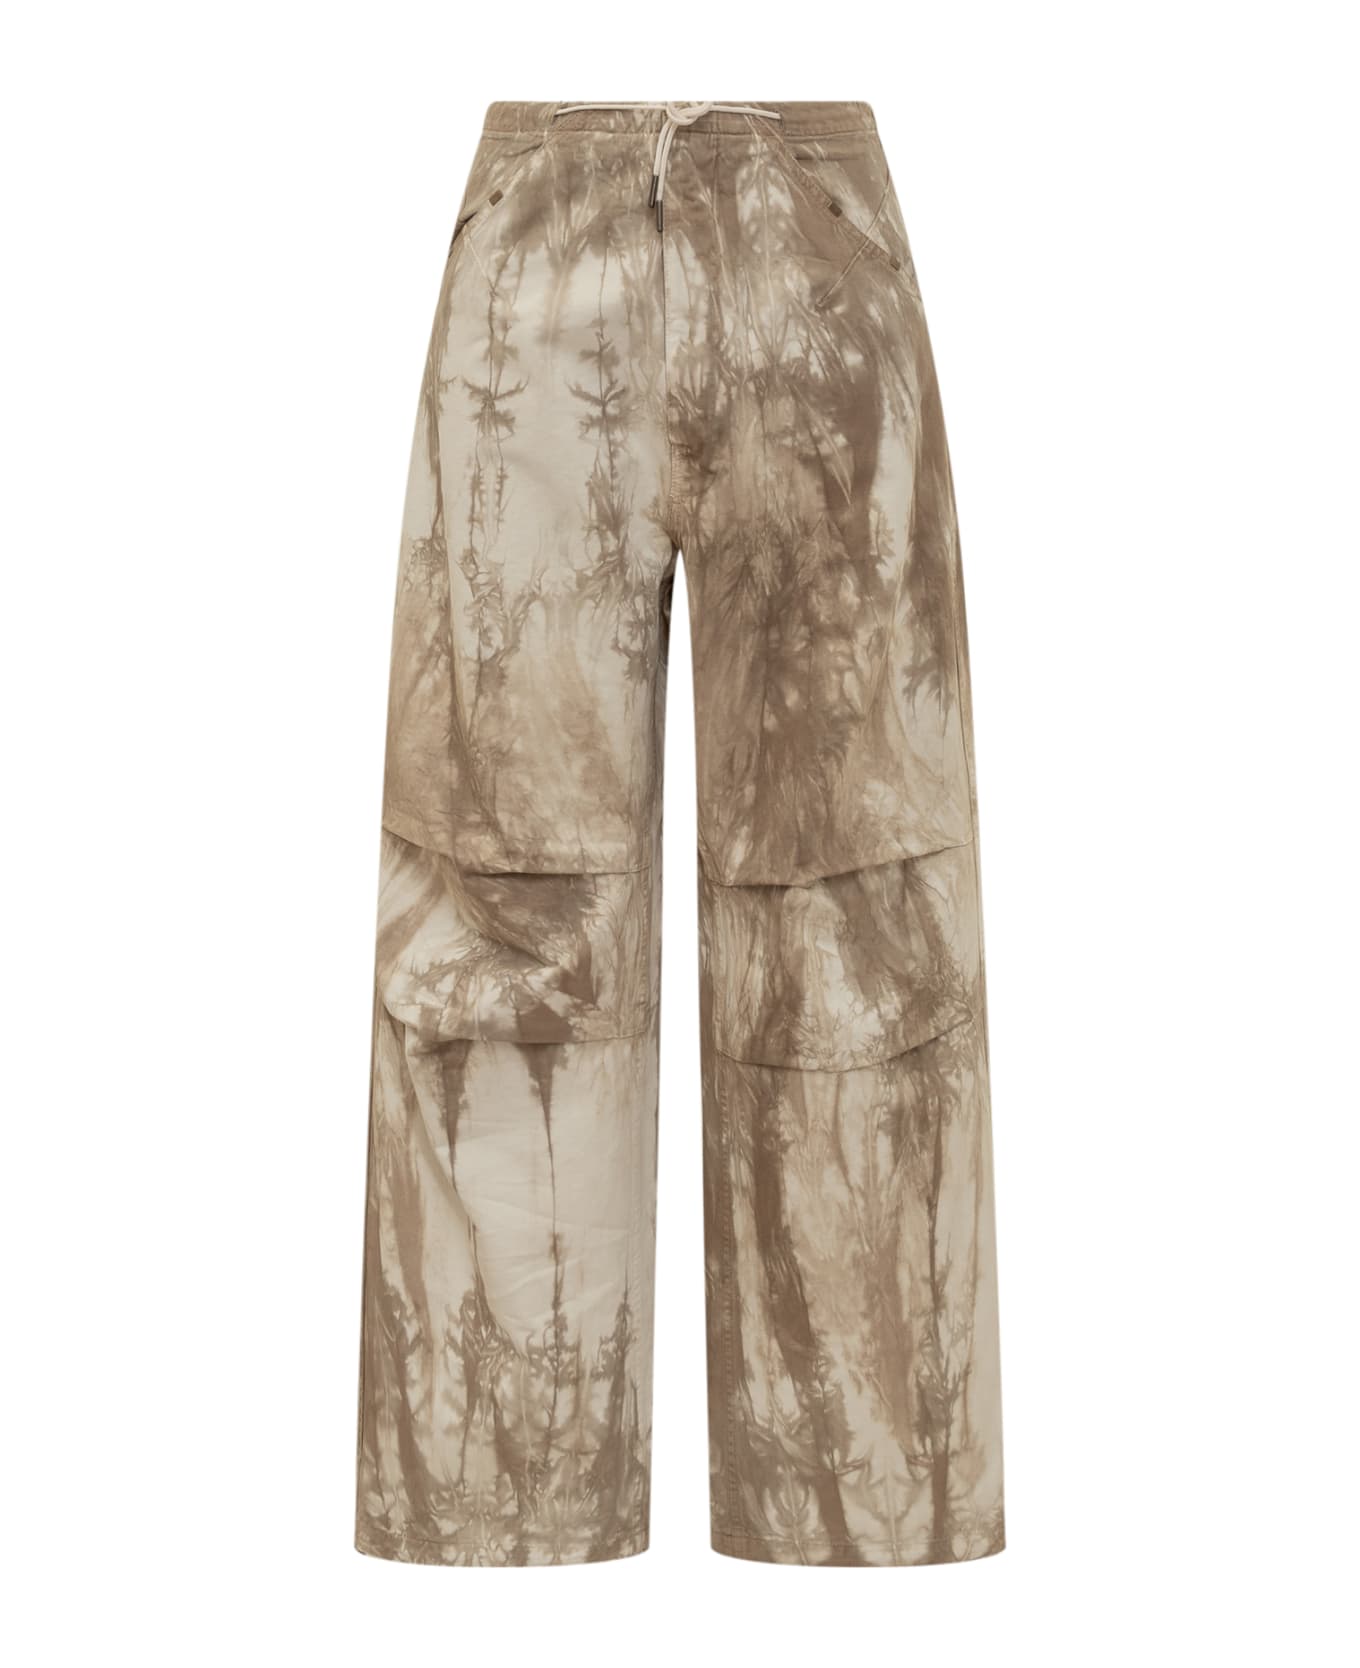 DARKPARK Daisy Milit Trousers - BEIGE/OFF-WHITE ボトムス